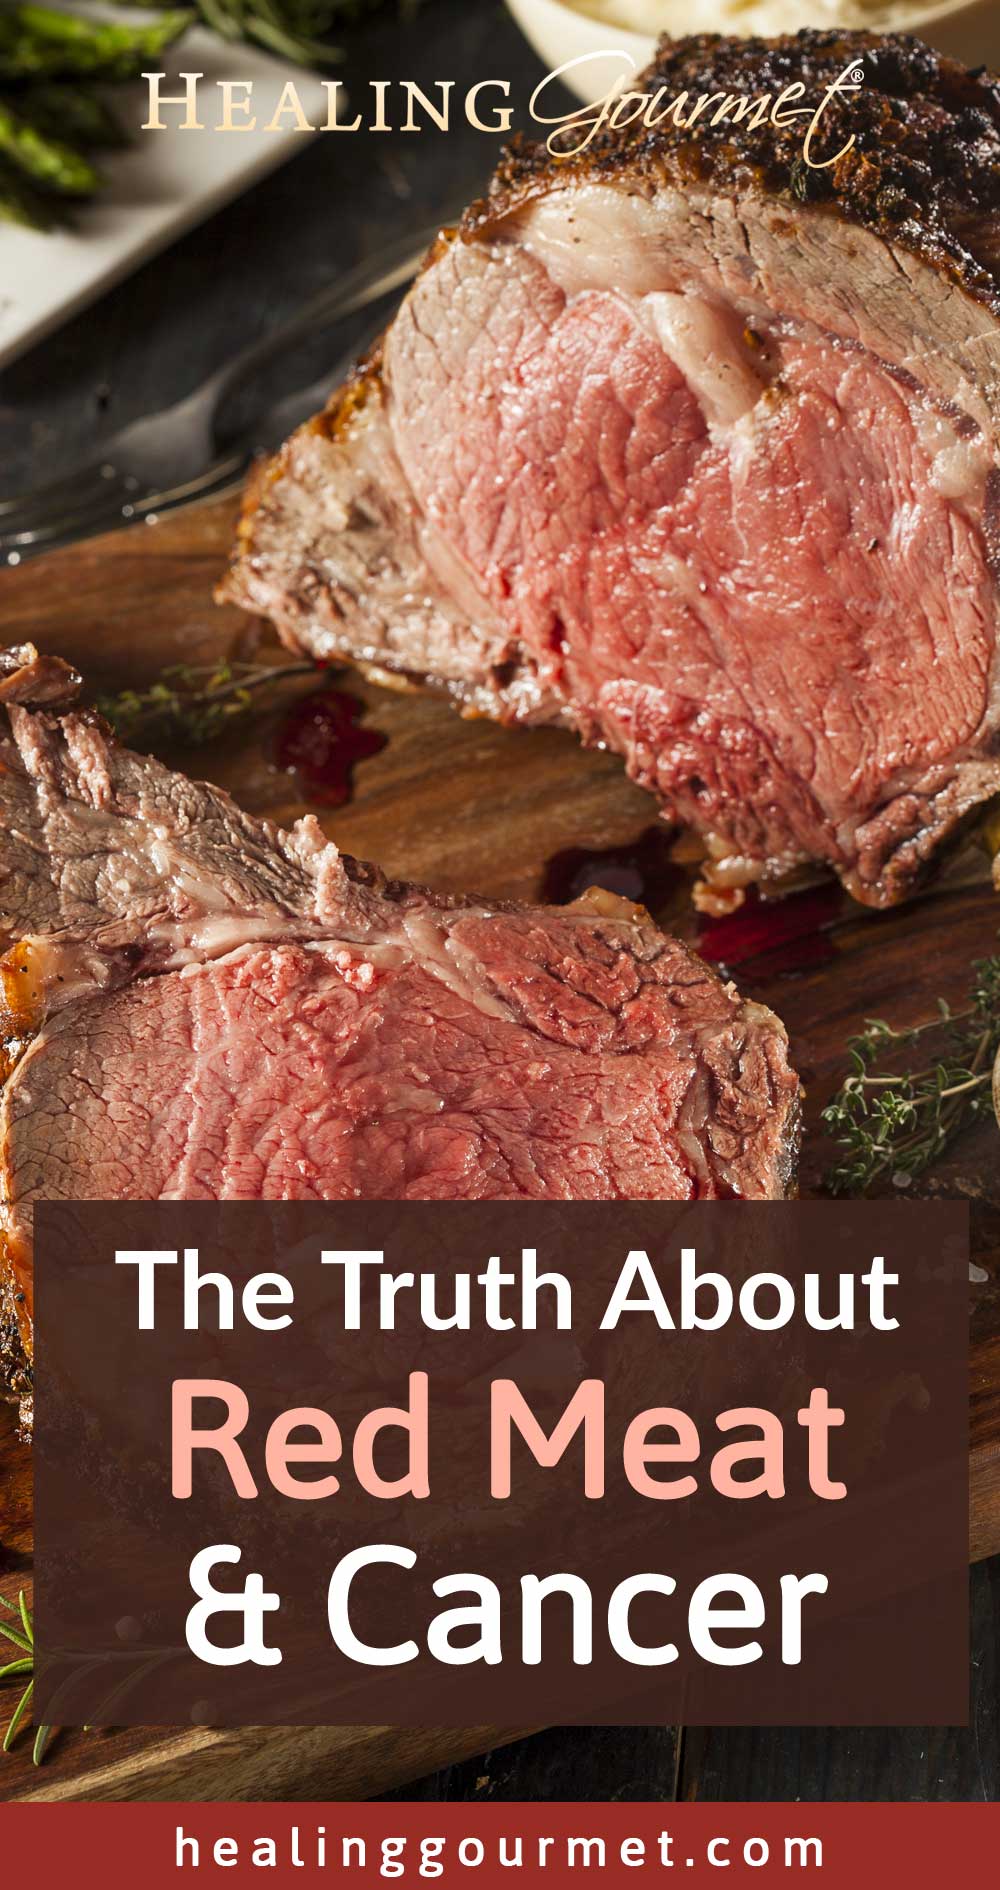 Does Red Meat Cause Cancer?